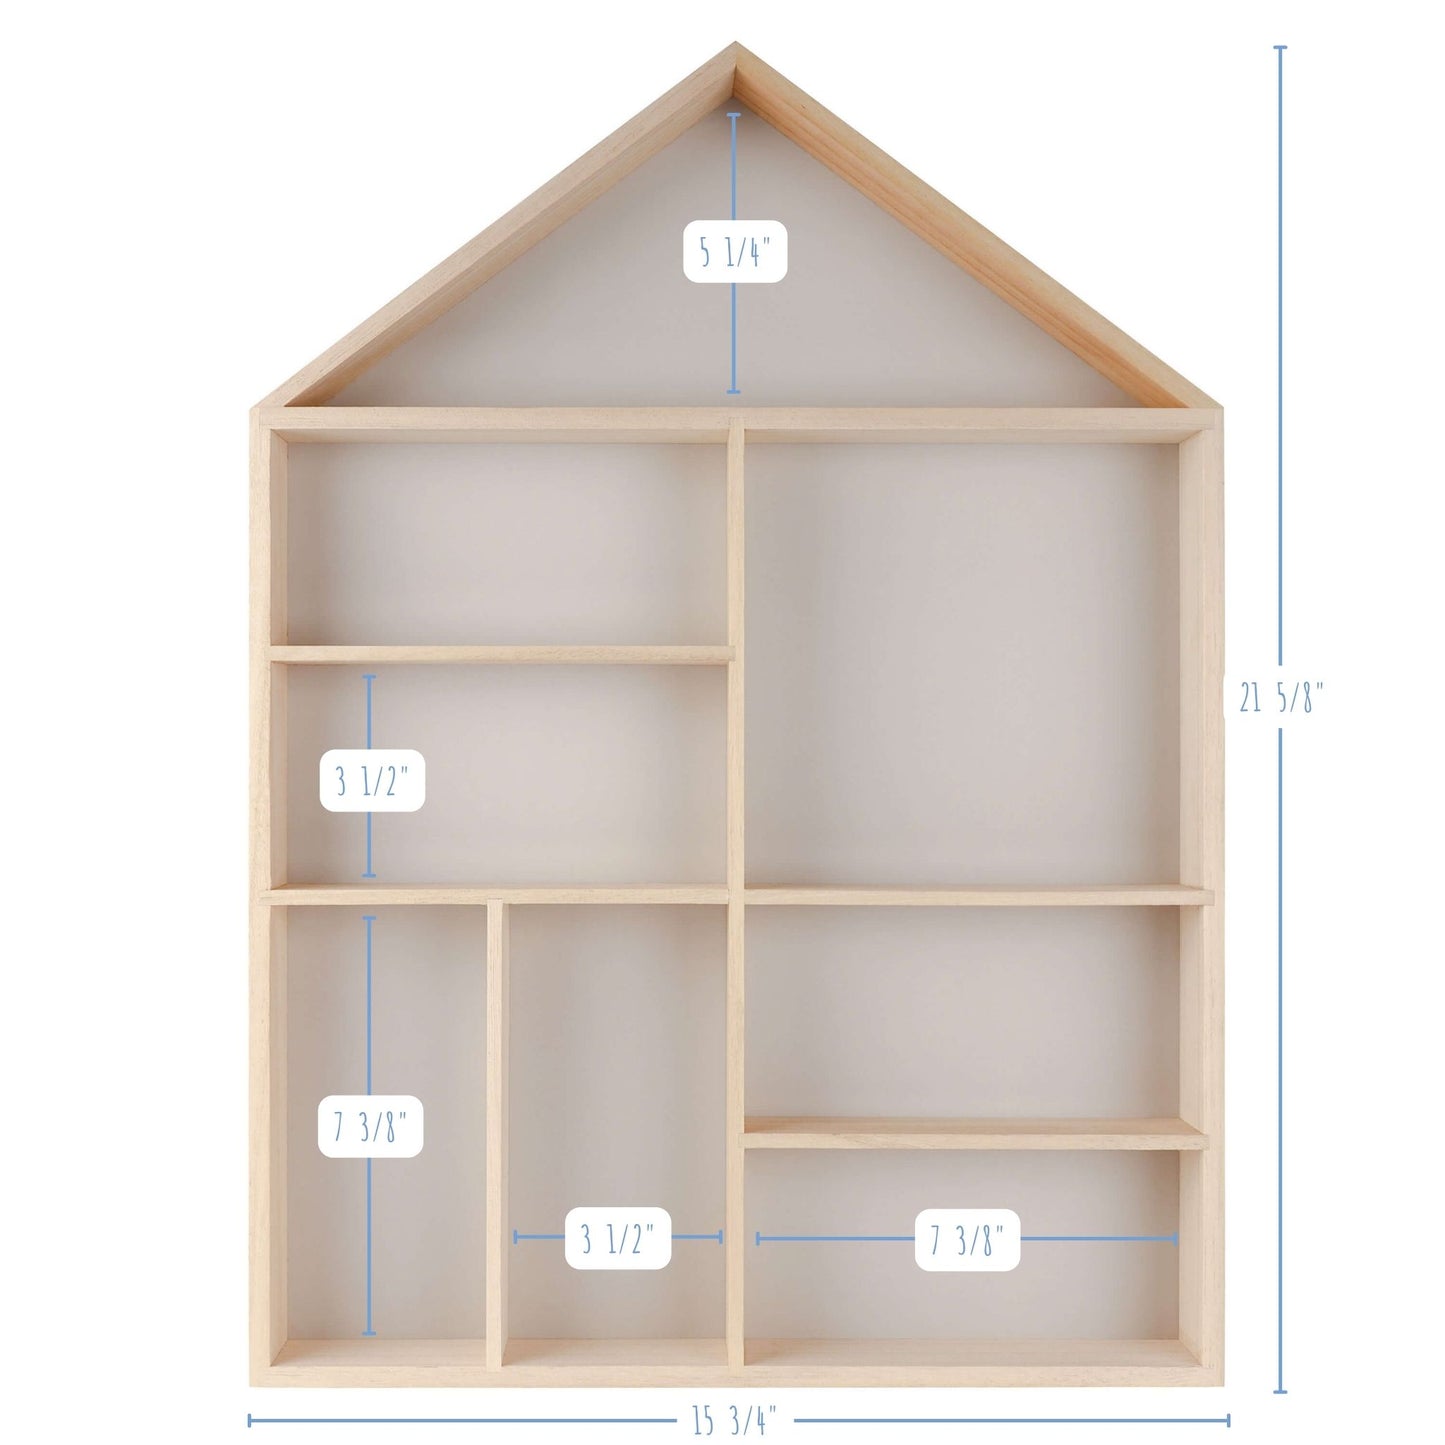 House shaped wooden toy display shelf with a gray-colored backboard - with compartments size detailed (front view)